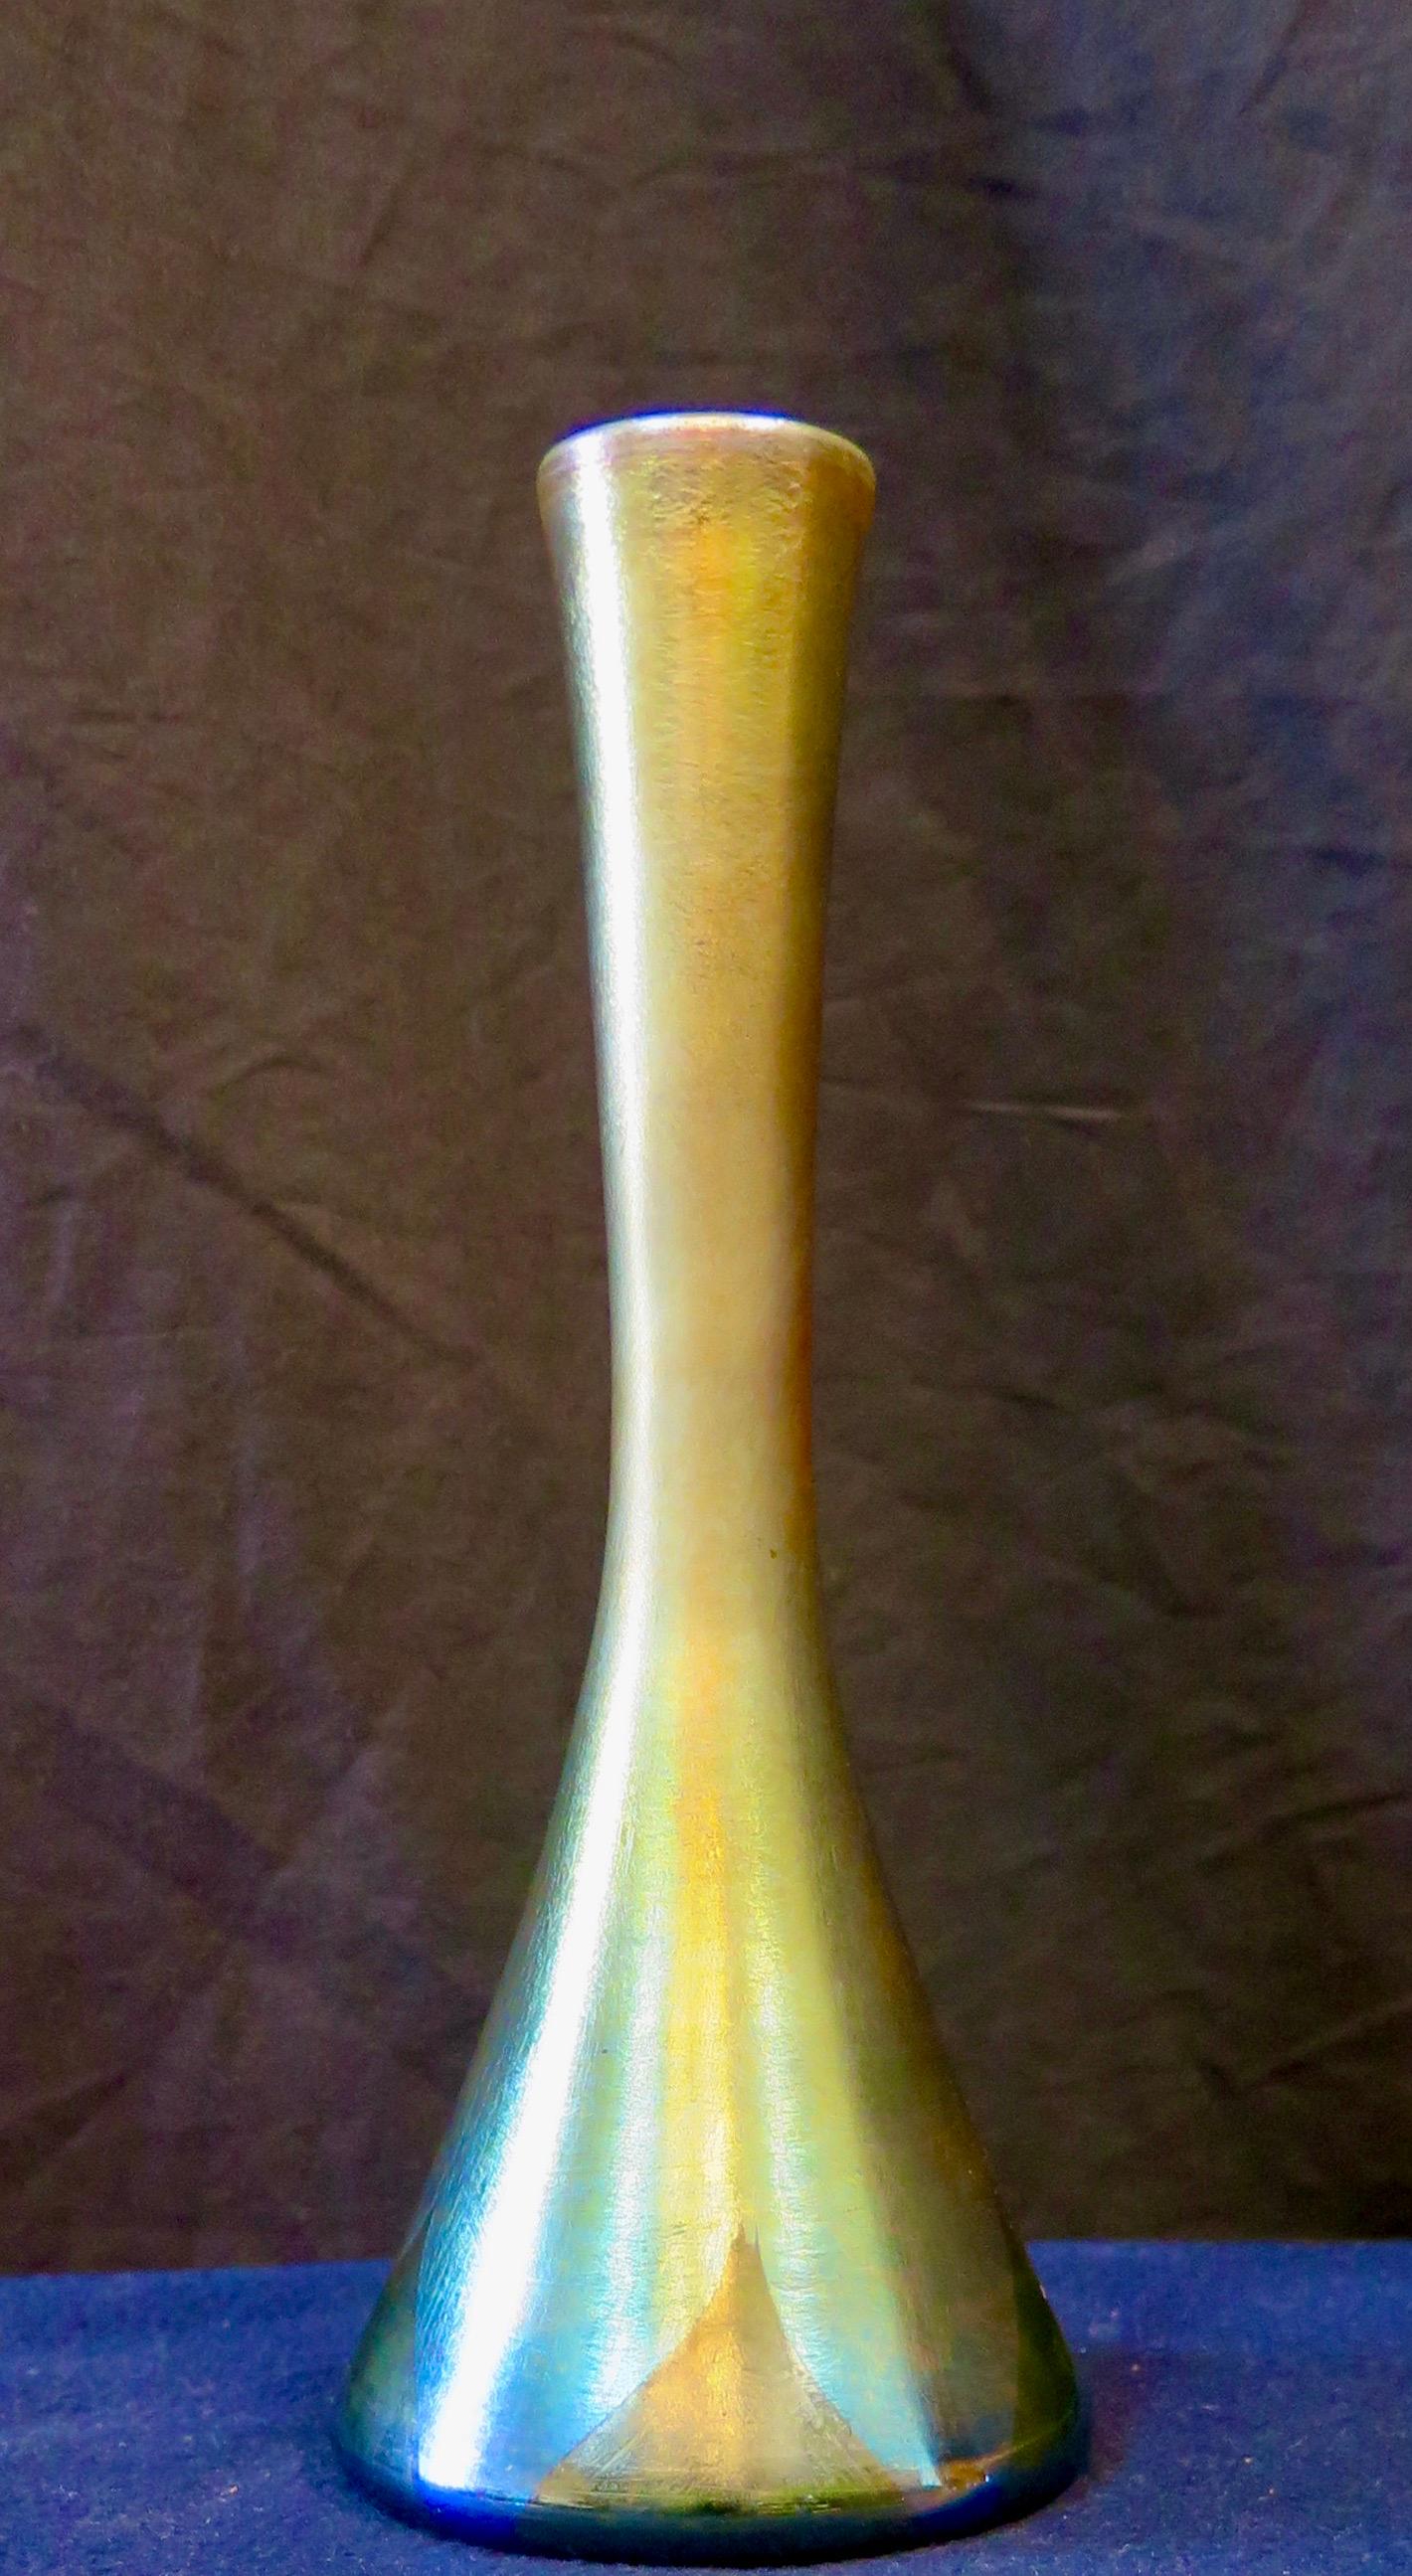 This vintage early 20th century Tiffany Studios, New York favrile art glass vase is numbered “3335” “J” & signed “L. C. Tiffany Favrile”. The vase has an elegant slender form with vivid coloration that is accented with iridescent solid “triangles”